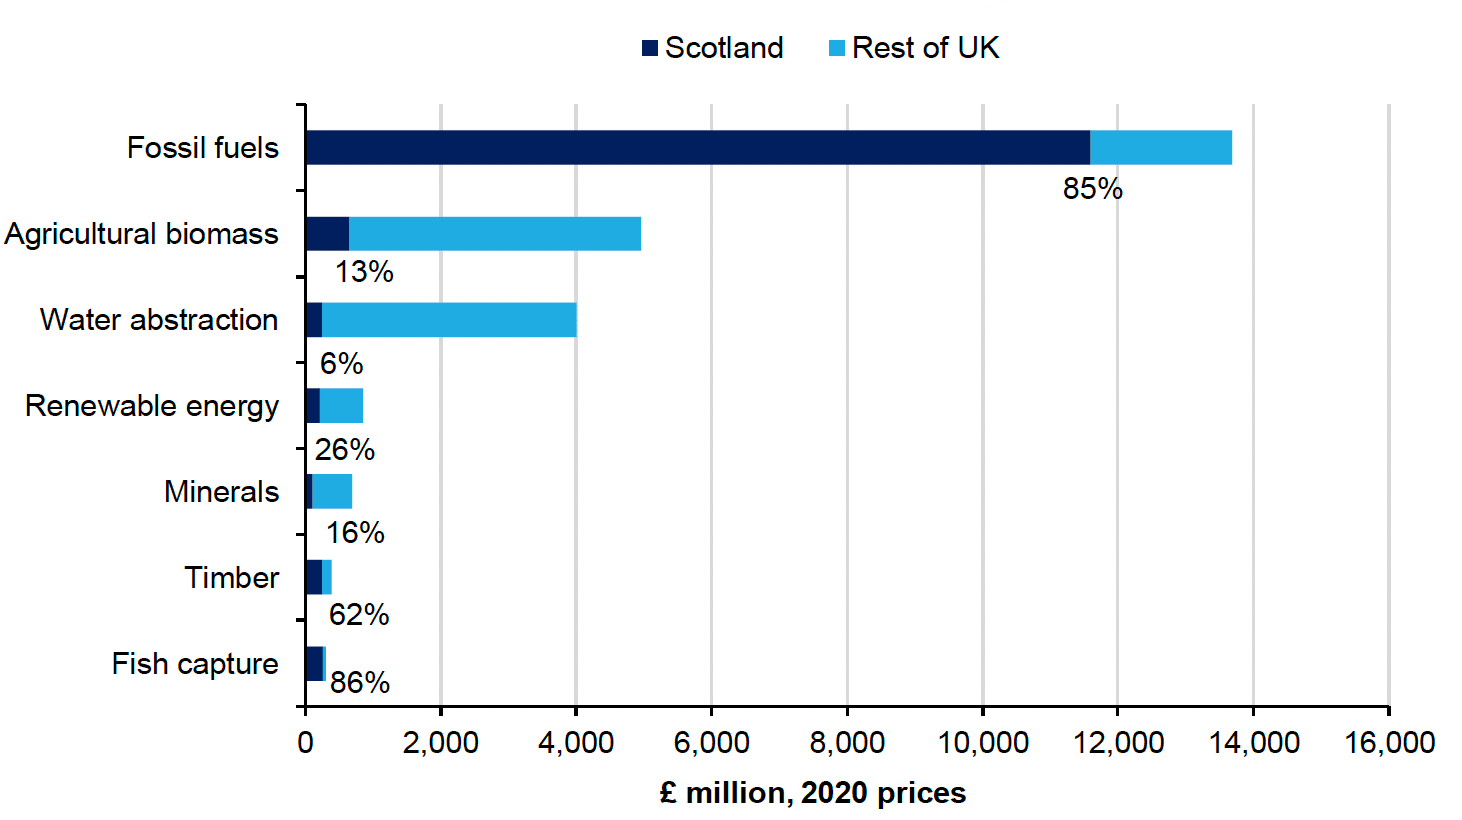 Figure 3: Stacked horizontal bar chart showing the proportion of the annual value of UK provisioning services accounted for by Scotland in 2018. Scotland account for the majority of the annual value for fossil fuels, timber and fish capture.